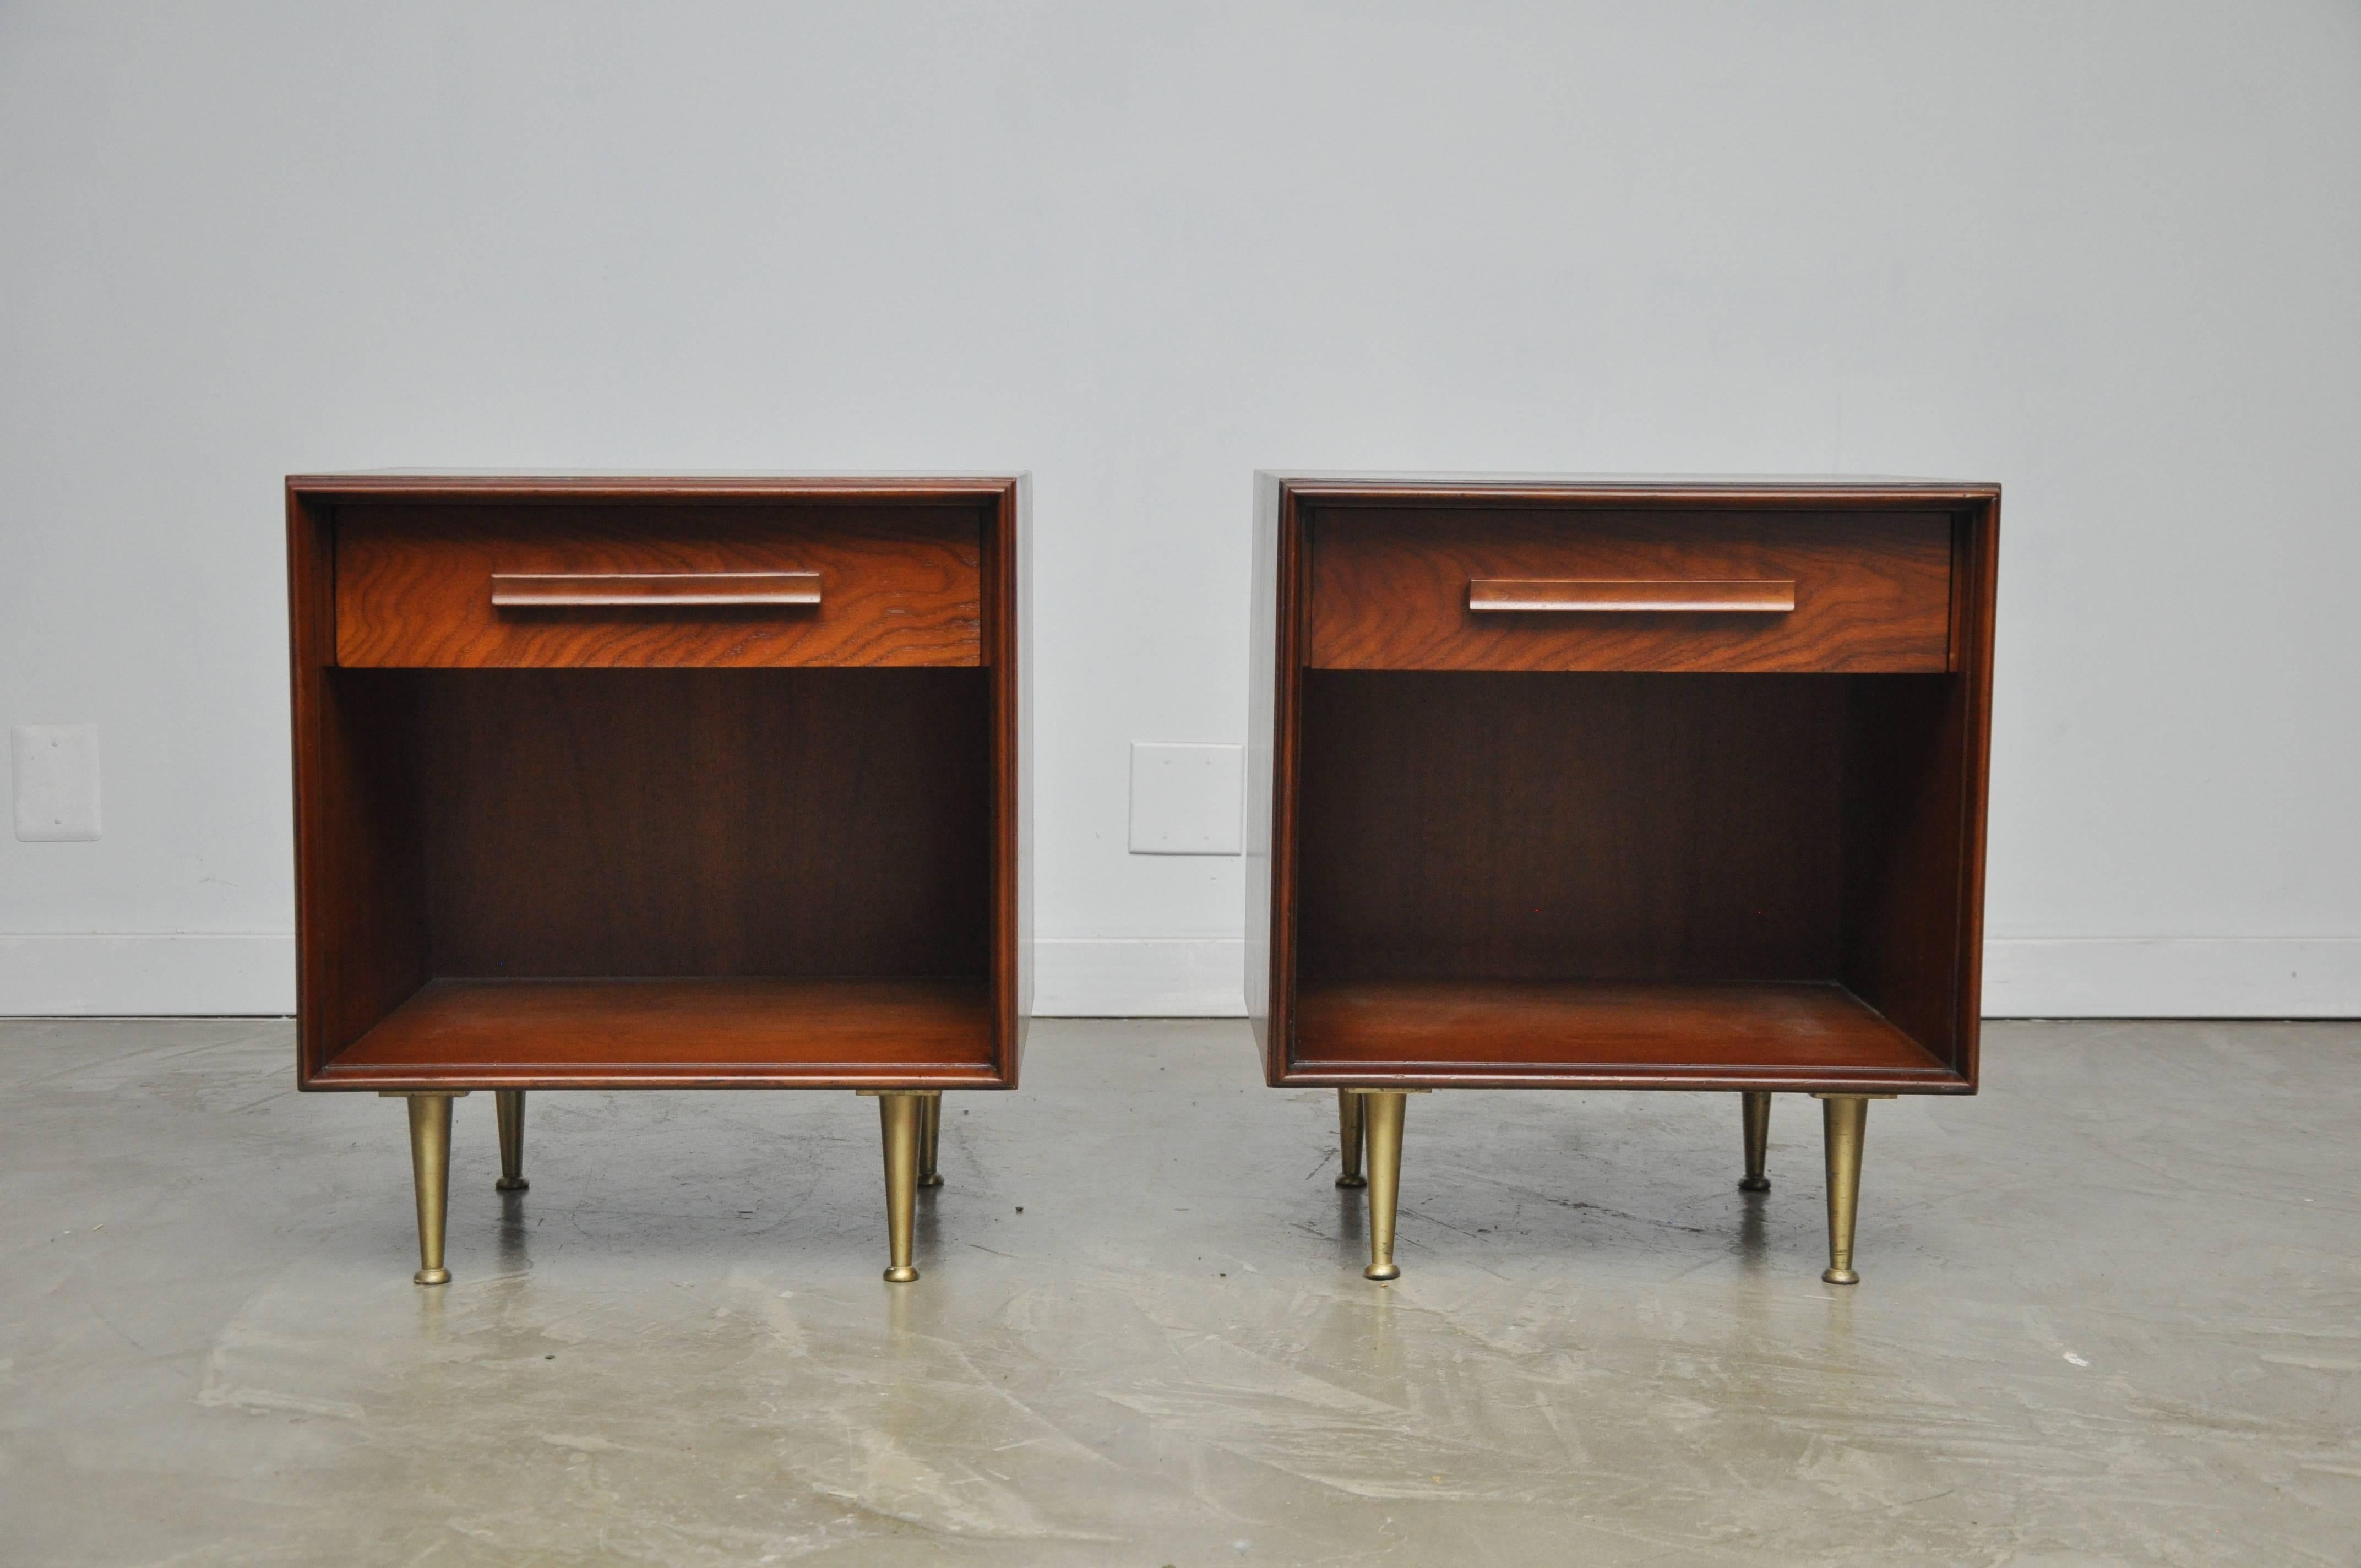 Pair of walnut nightstands with brass legs by T.H. Robsjohn-Gibbings for Widdicomb.

Matching chest is available.